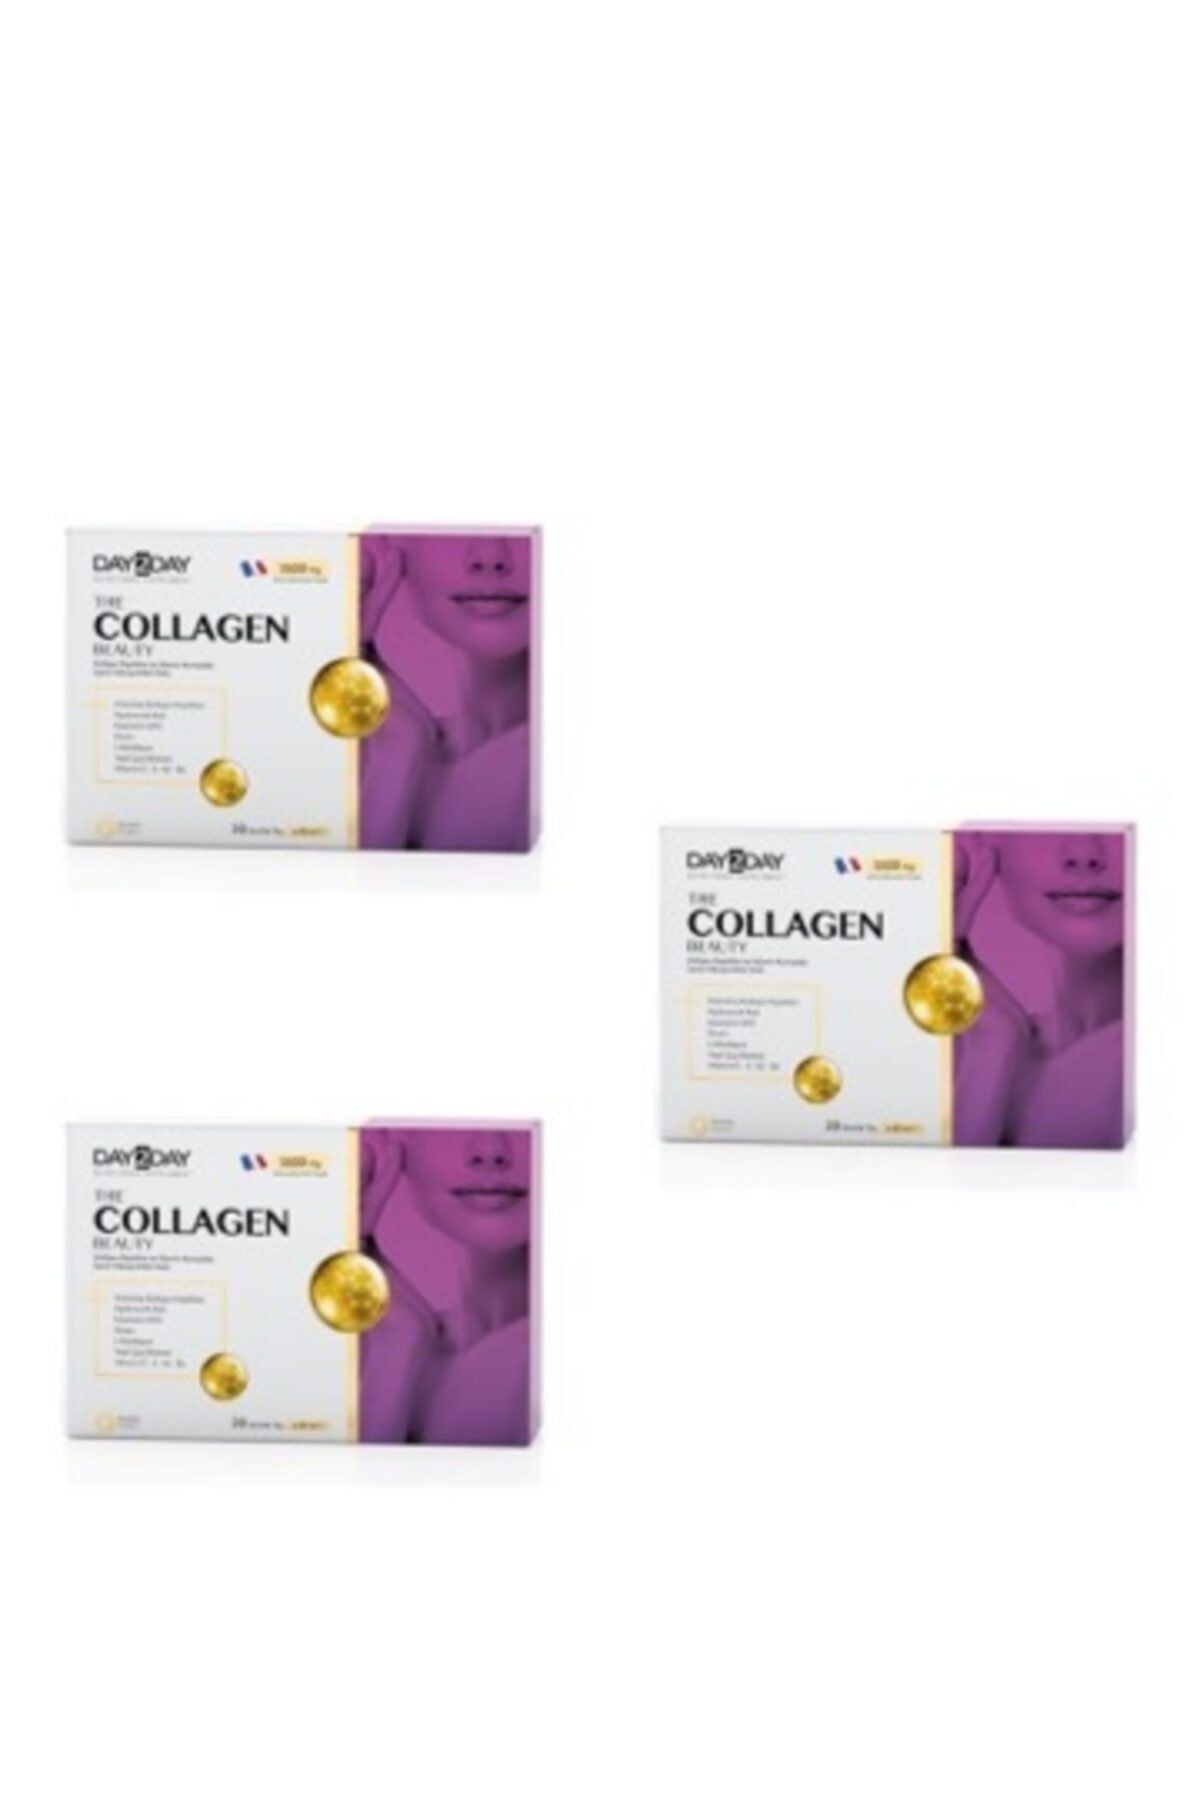 DAY2DAY The Collagen Beauty 30 Tüp X 40 Ml X3 Adet